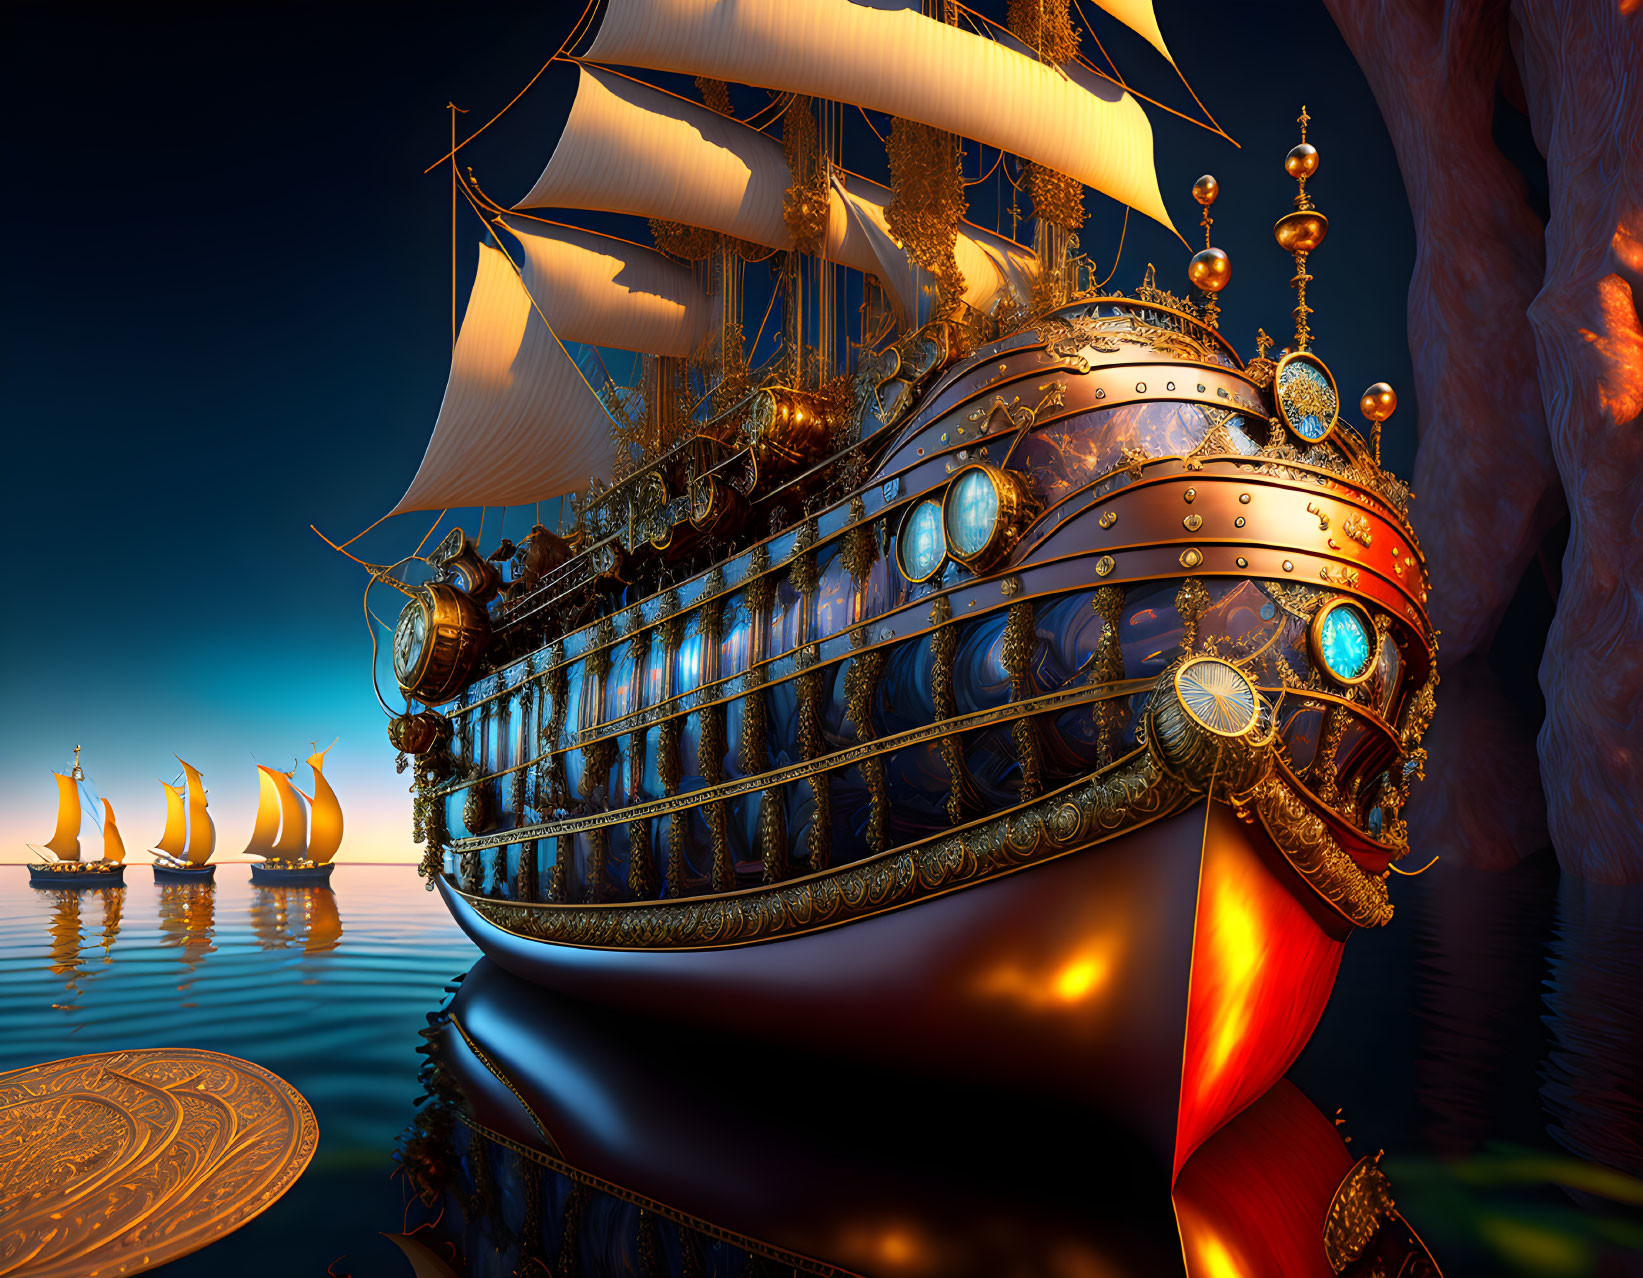 Golden ornate galleon sailing on tranquil waters at sunset with rock formations.